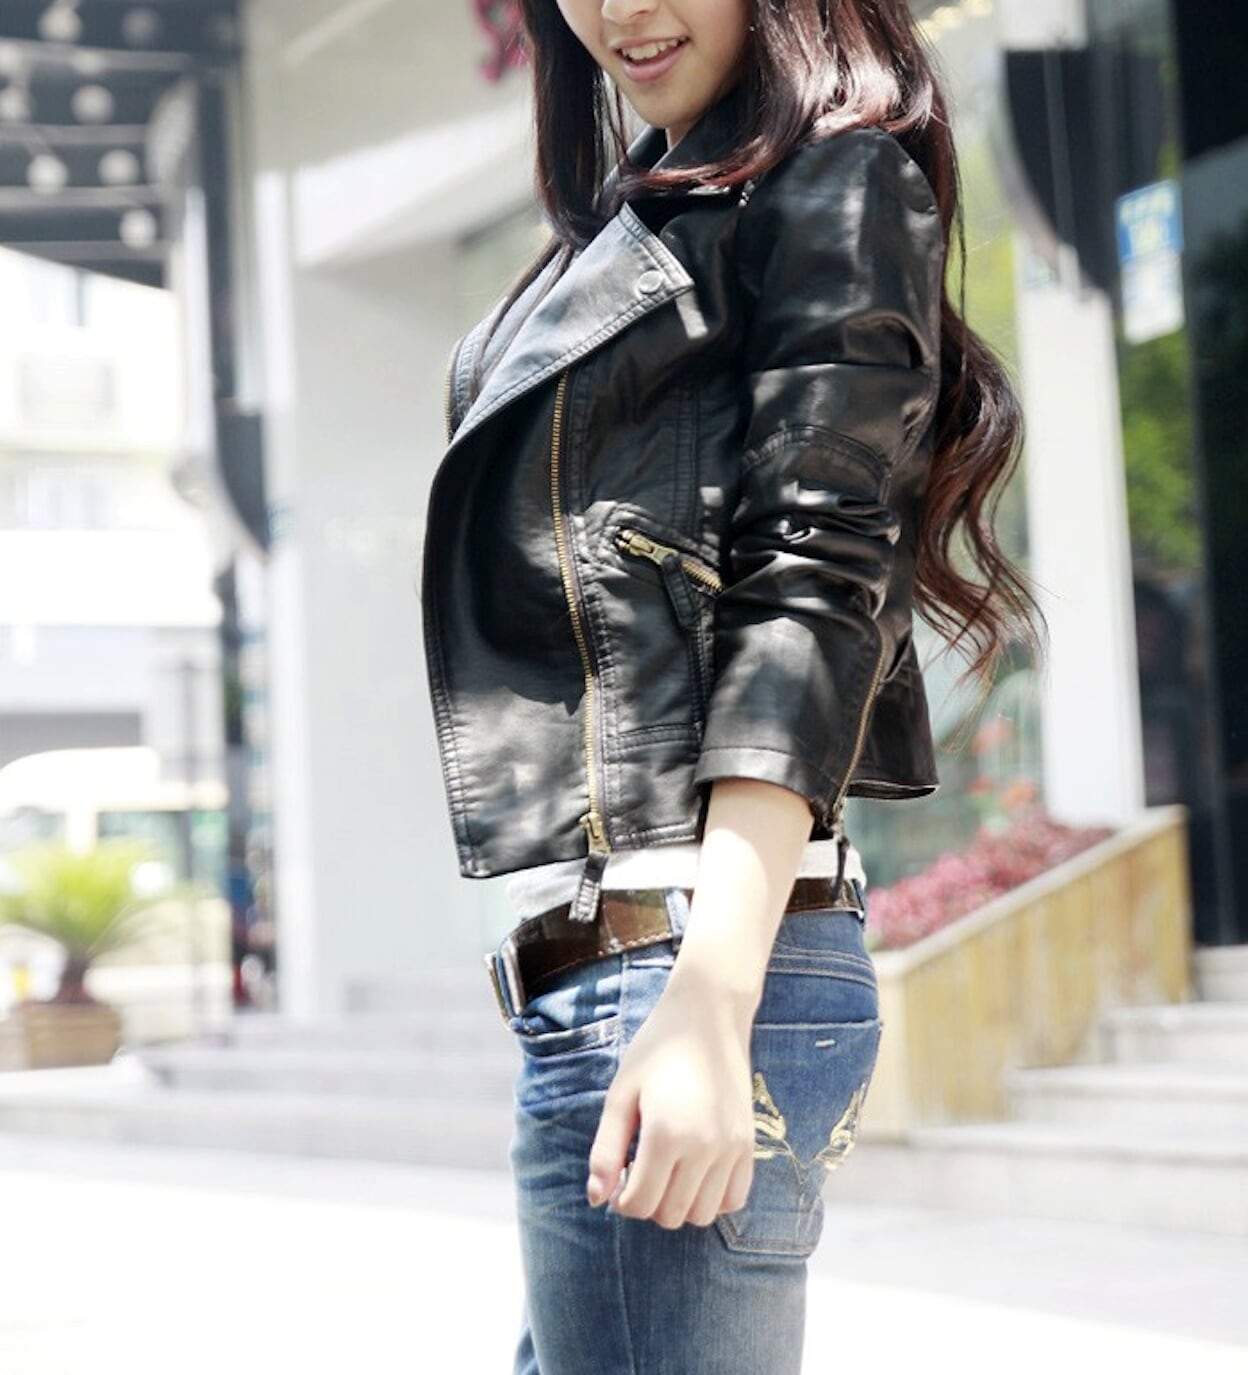 A person wearing a black Womens Cropped Vegan Leather Jacket by Yellow Pandora and blue jeans stands outdoors near a building.